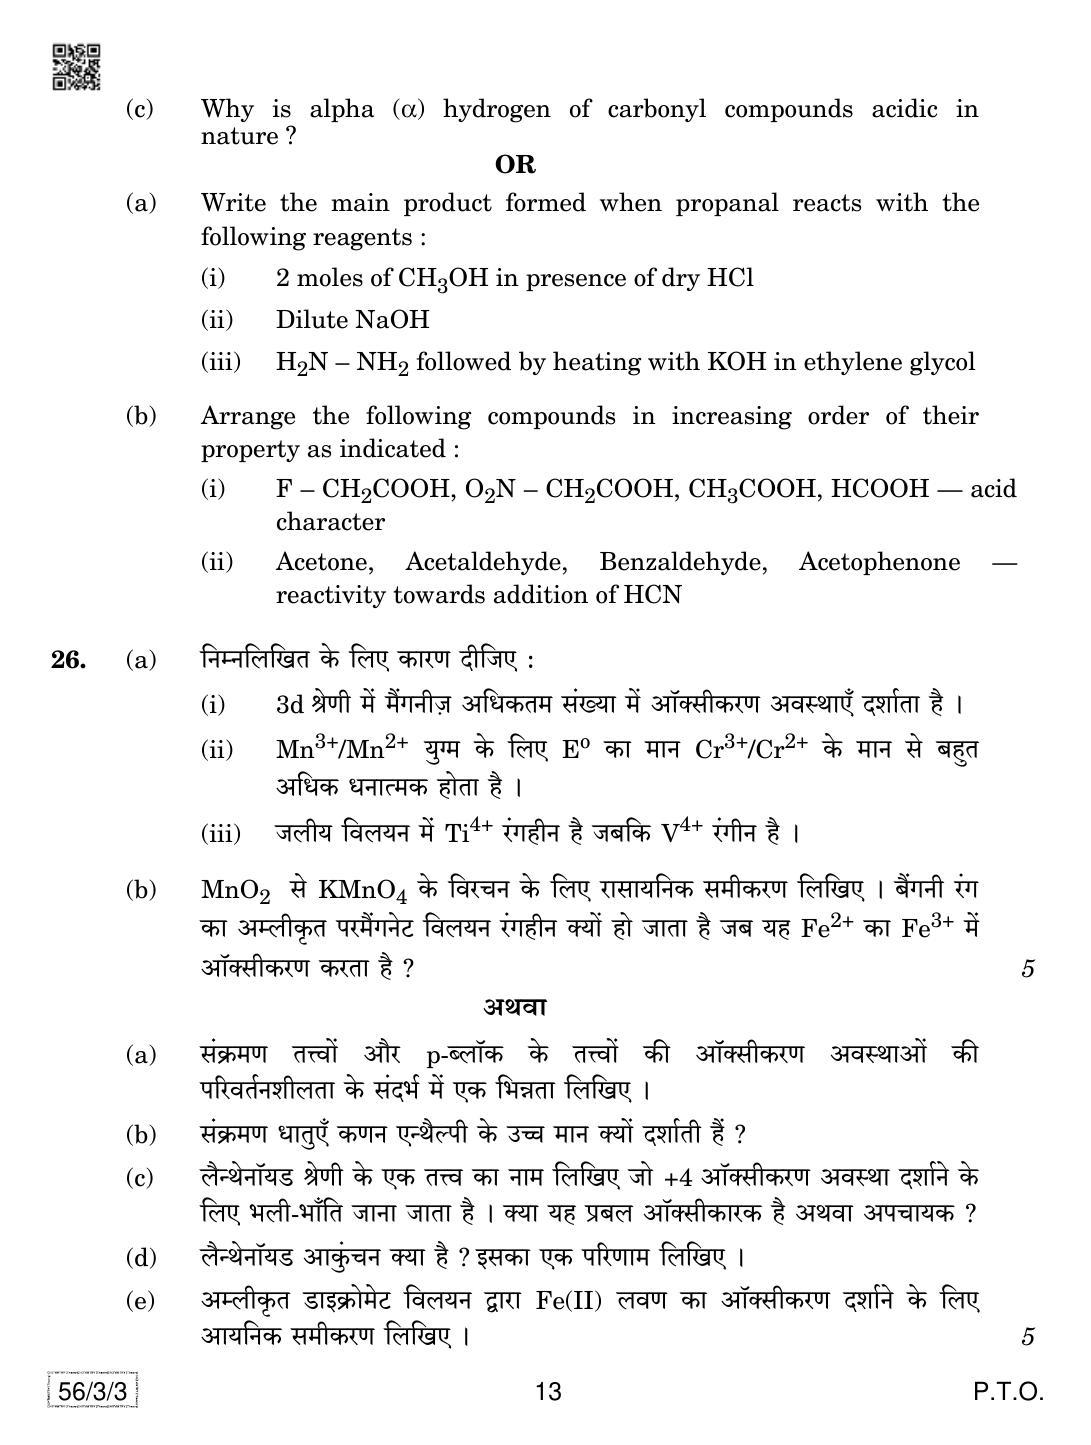 CBSE Class 12 56-3-3 Chemistry 2019 Question Paper - Page 13